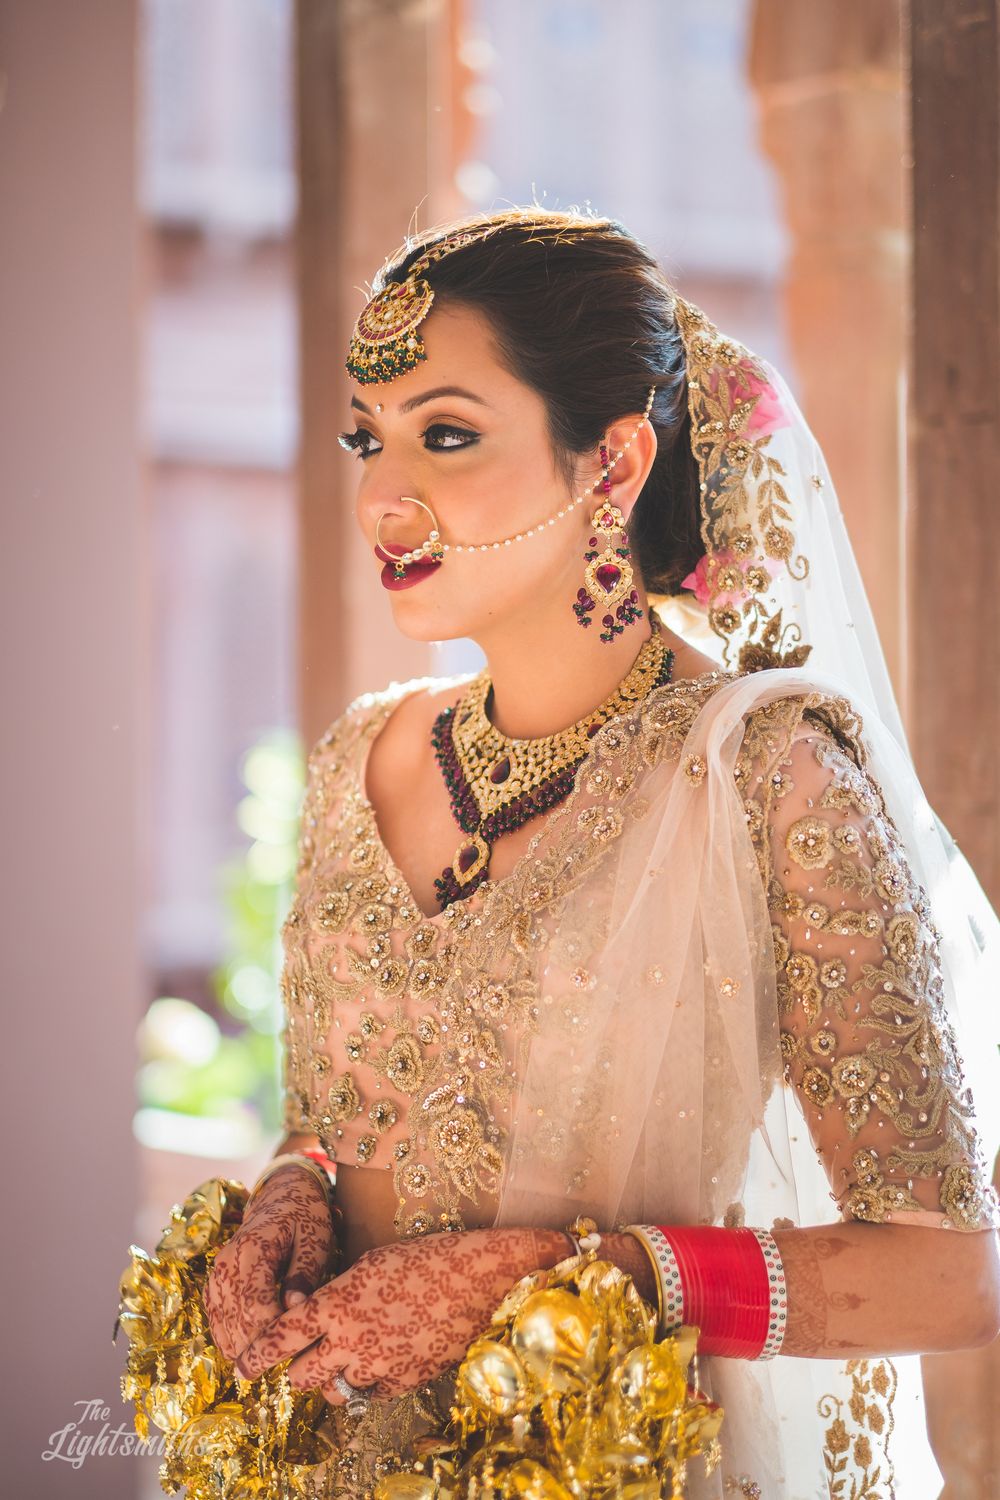 Photo of A beautiful bride with minimal makeup and jewellery.